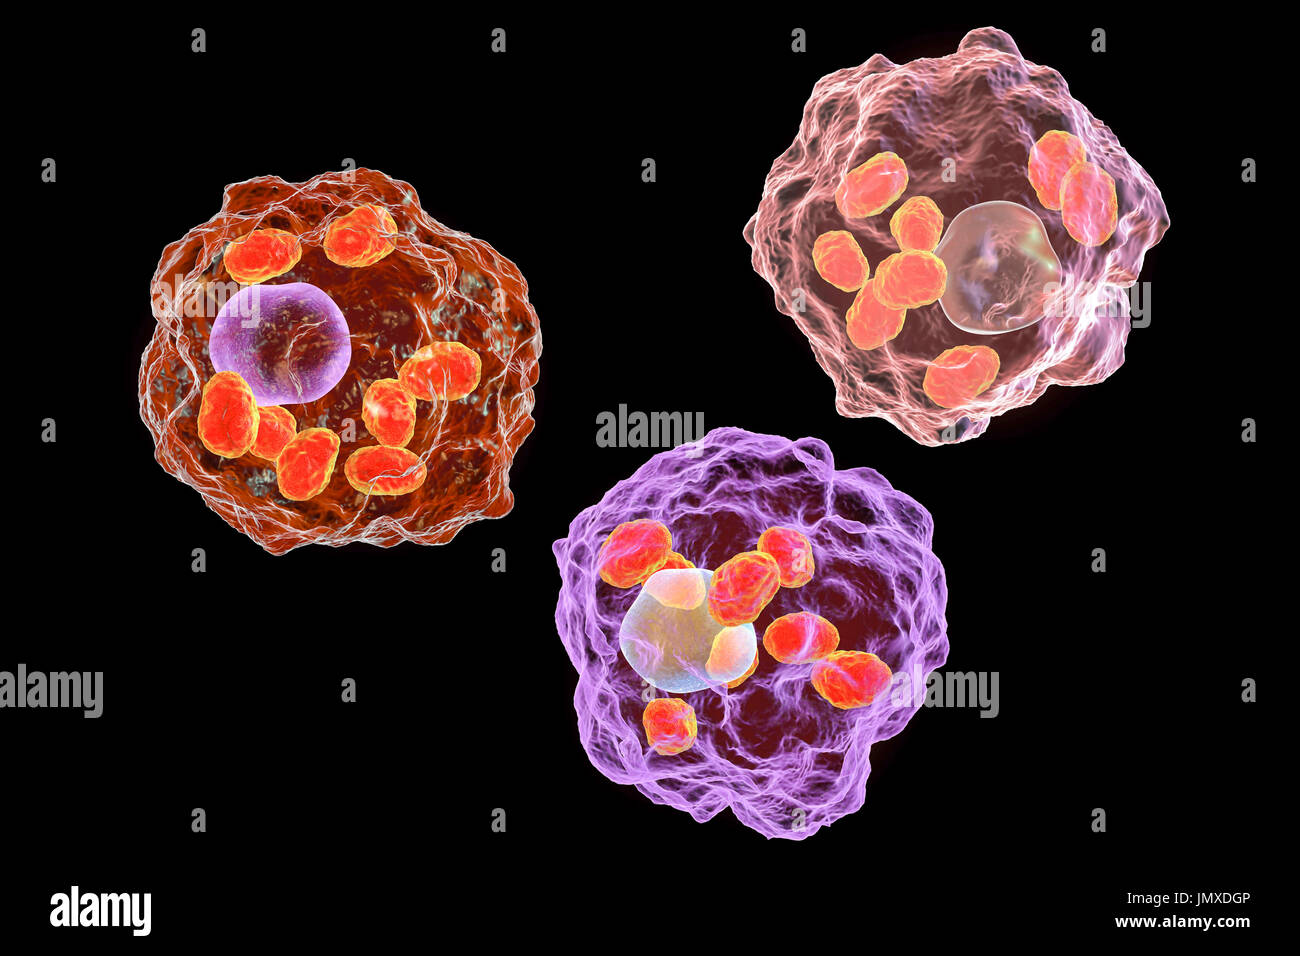 Amastigotes of Leishmania parasites inside macrophages, illustration. Leishmania sp. cause leishmaniosis, a tropical disease transmitted by bites from infected sand-flies. These are the non-flagellated amastigote form of the parasite. In humans flagellated promastigotes infect macrophages and are transformed into amastigotes. There are two forms of leishmaniosis. The first, cutaneous leishmaniosis, affects the skin giving rise to an ulcer at the site of the bite. This mainly heals naturally, although scarring may occur. The more serious, visceral leishmaniosis (kala-azar), causes fever and Stock Photo